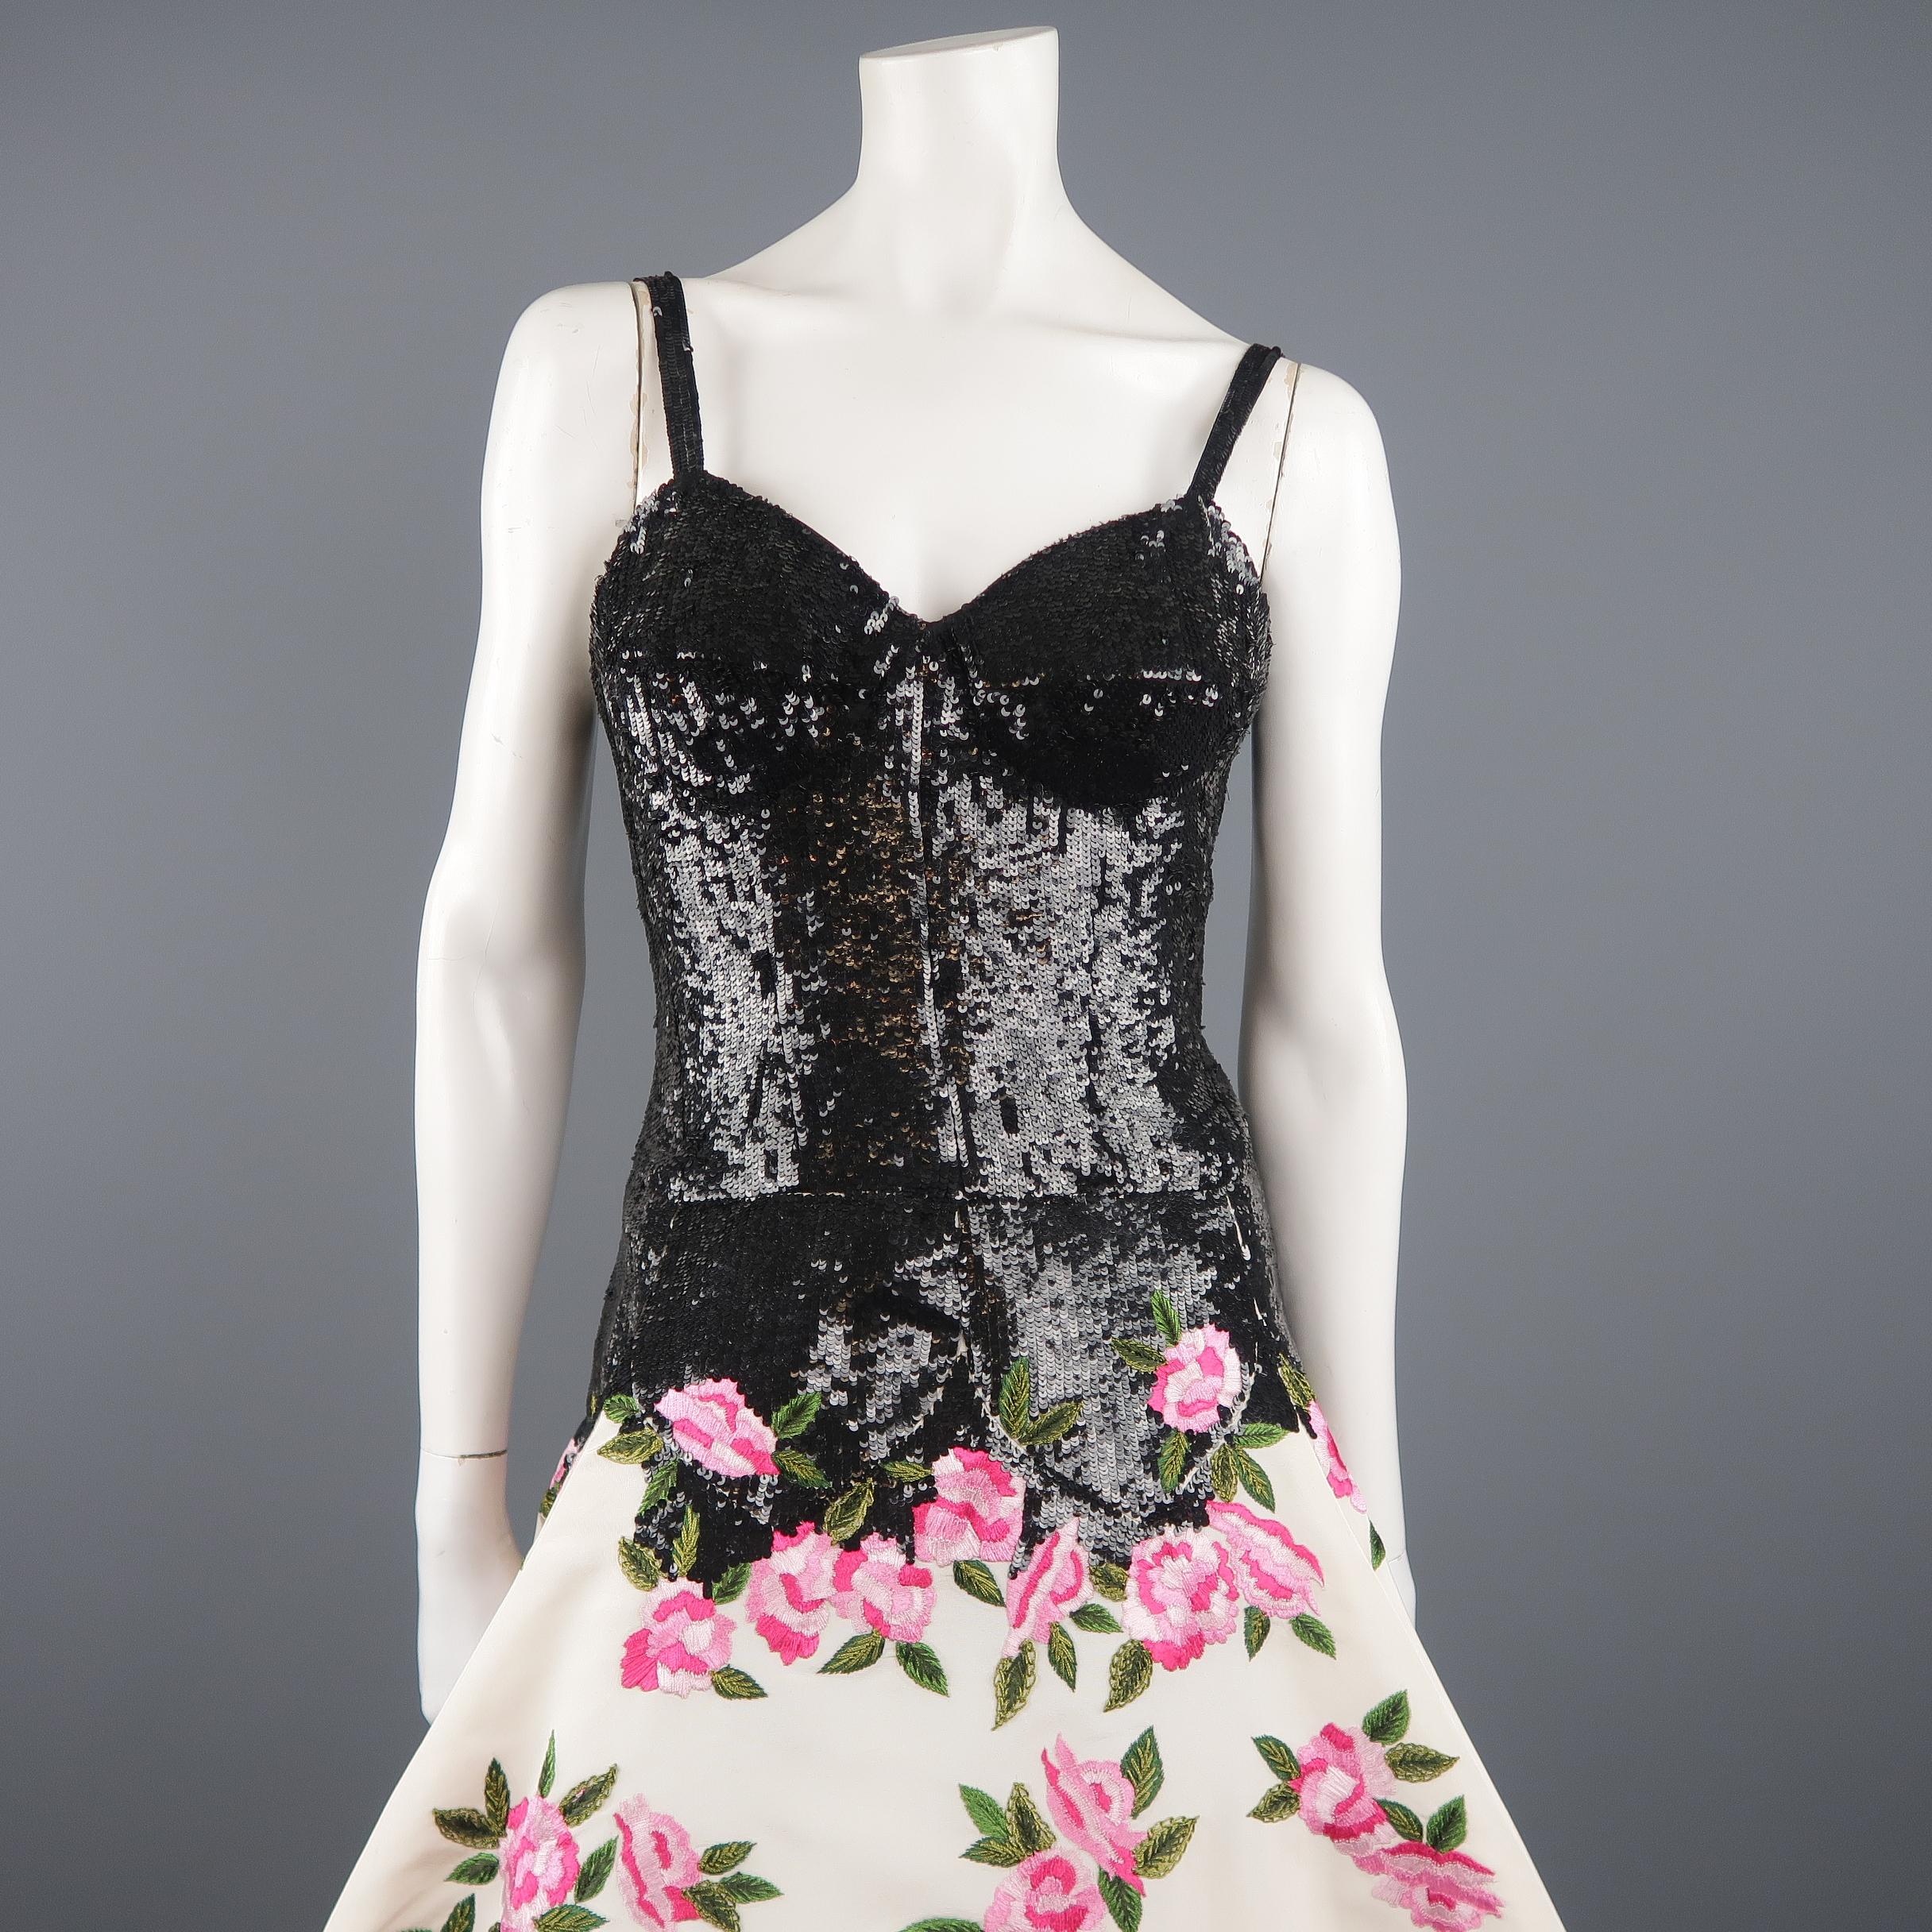 OSCAR DE LA RENTA evening gown features a black sequin sweetheart bustier bodice with a drop waist and straps, with a full tulle crinoline lined, cream silk taffeta skirt with pink floral embroidery throughout. Circa 2015. Made in USA.
 
New with